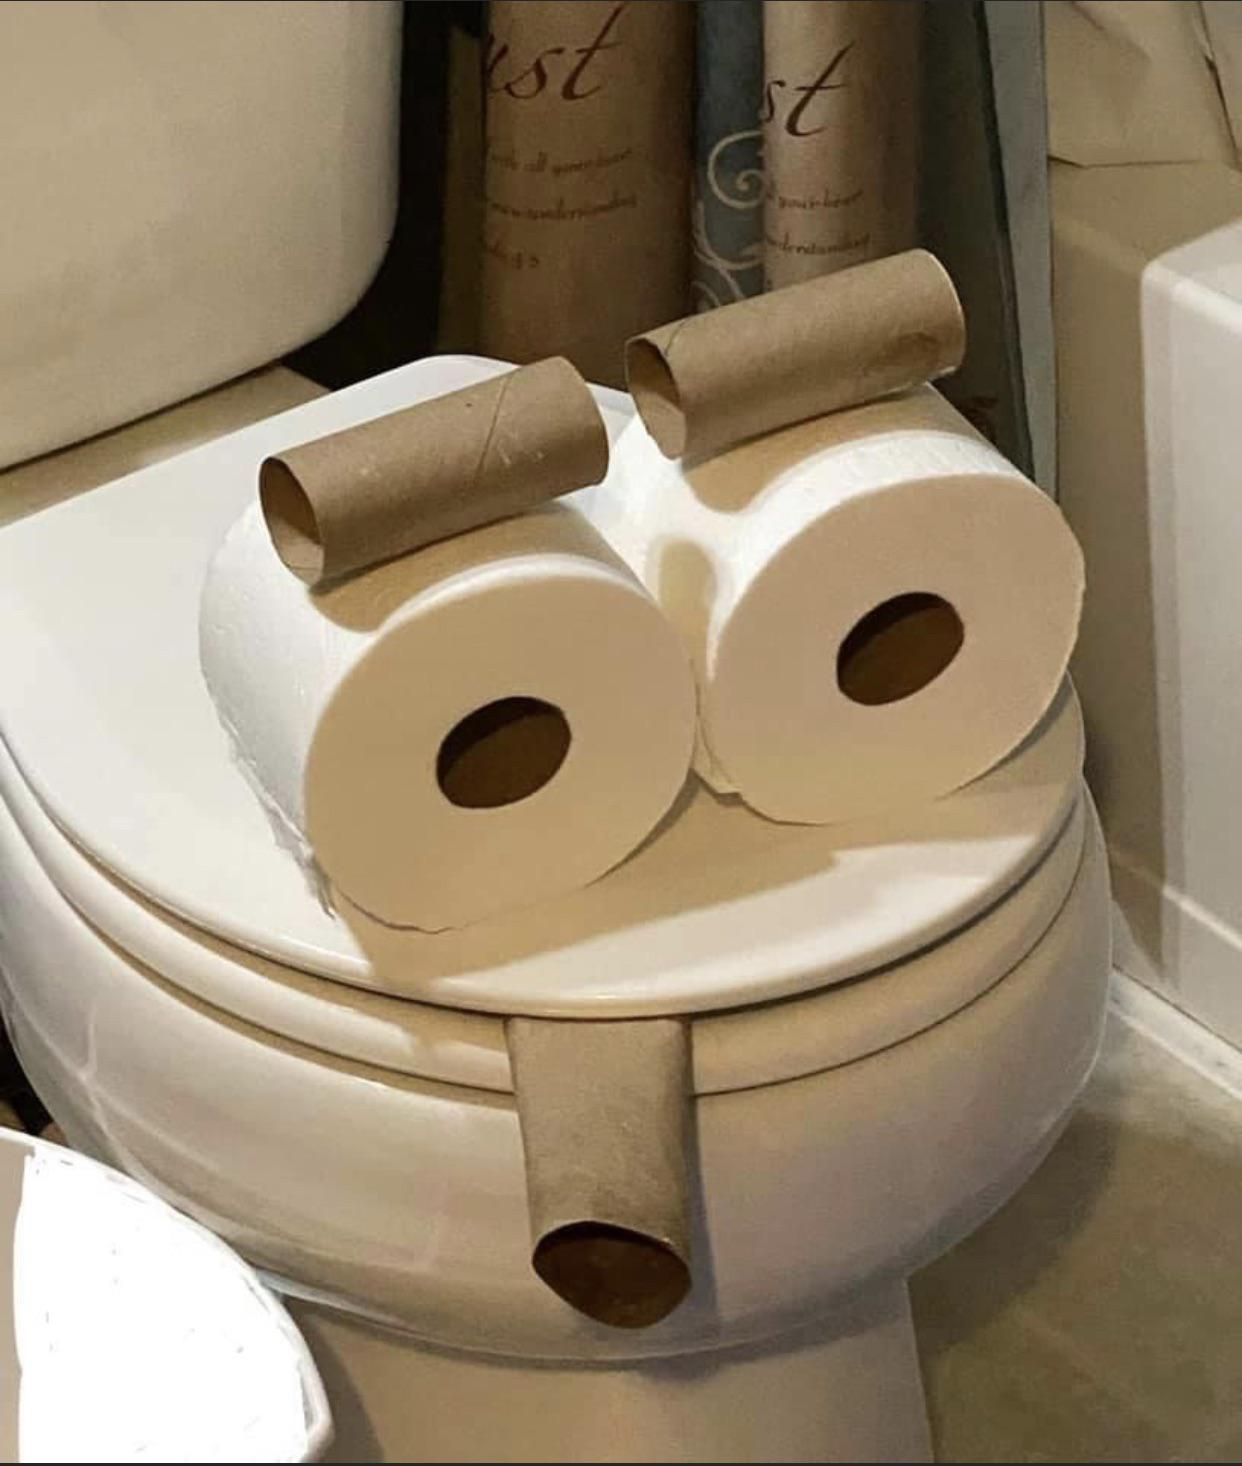 Our daughter told us the toilet was smoking and we walked in to this. Yes, I realize this is not an original joke, but it was the first time we had seen it.